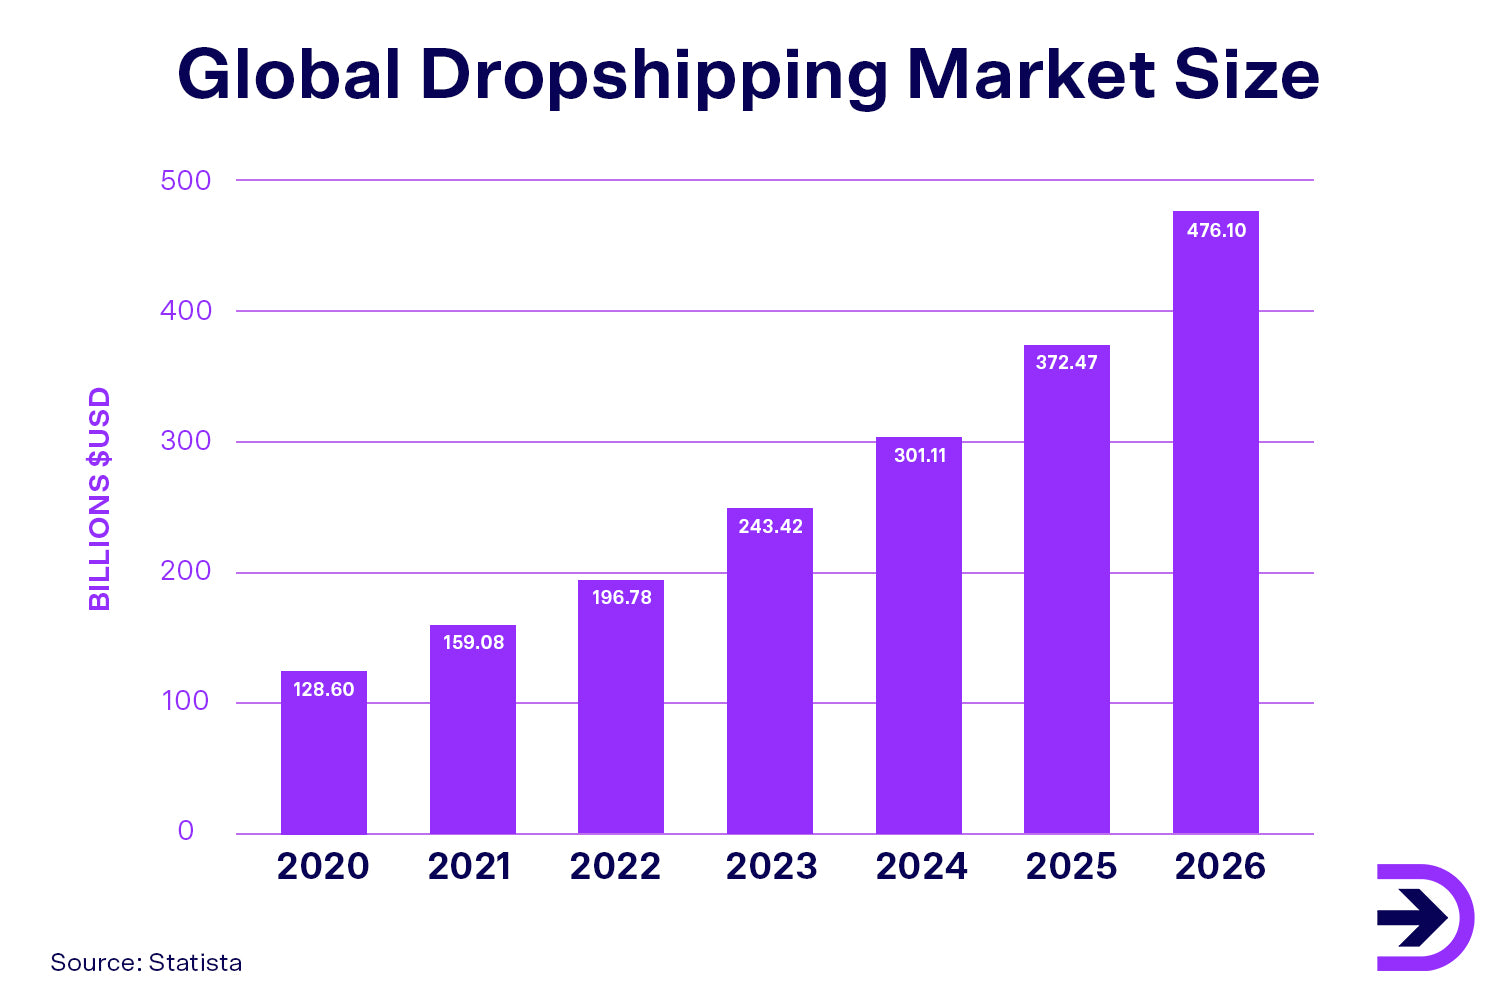 The global dropshipping market continues to grow with a projected $243.42 billion in 2023.